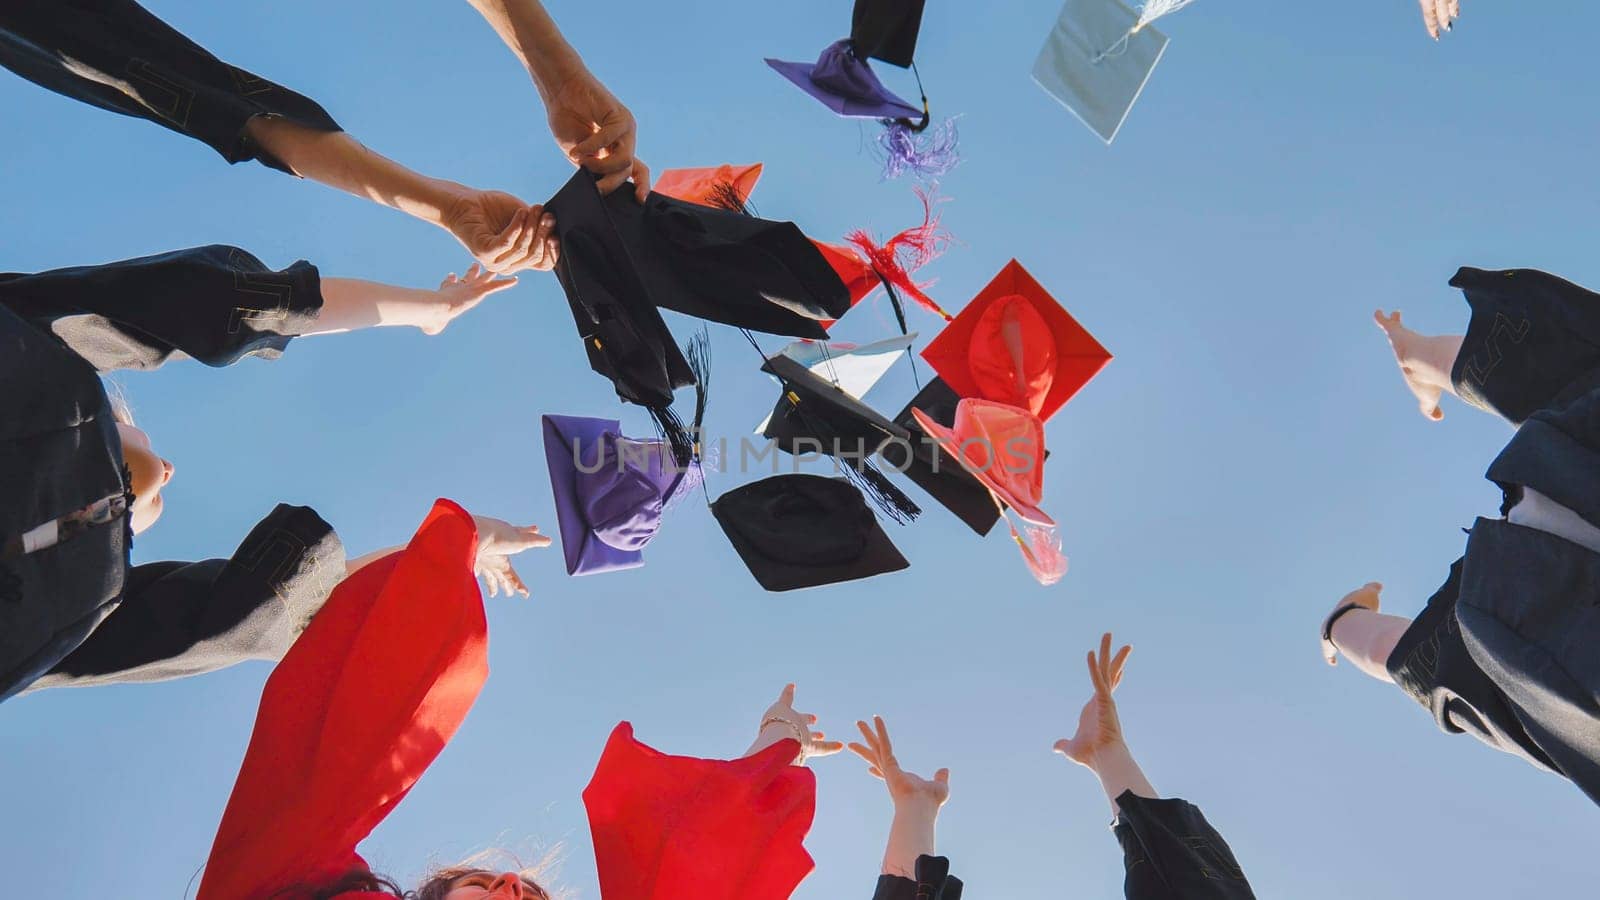 Graduates tossing multicolored hats against a blue sky. by DovidPro